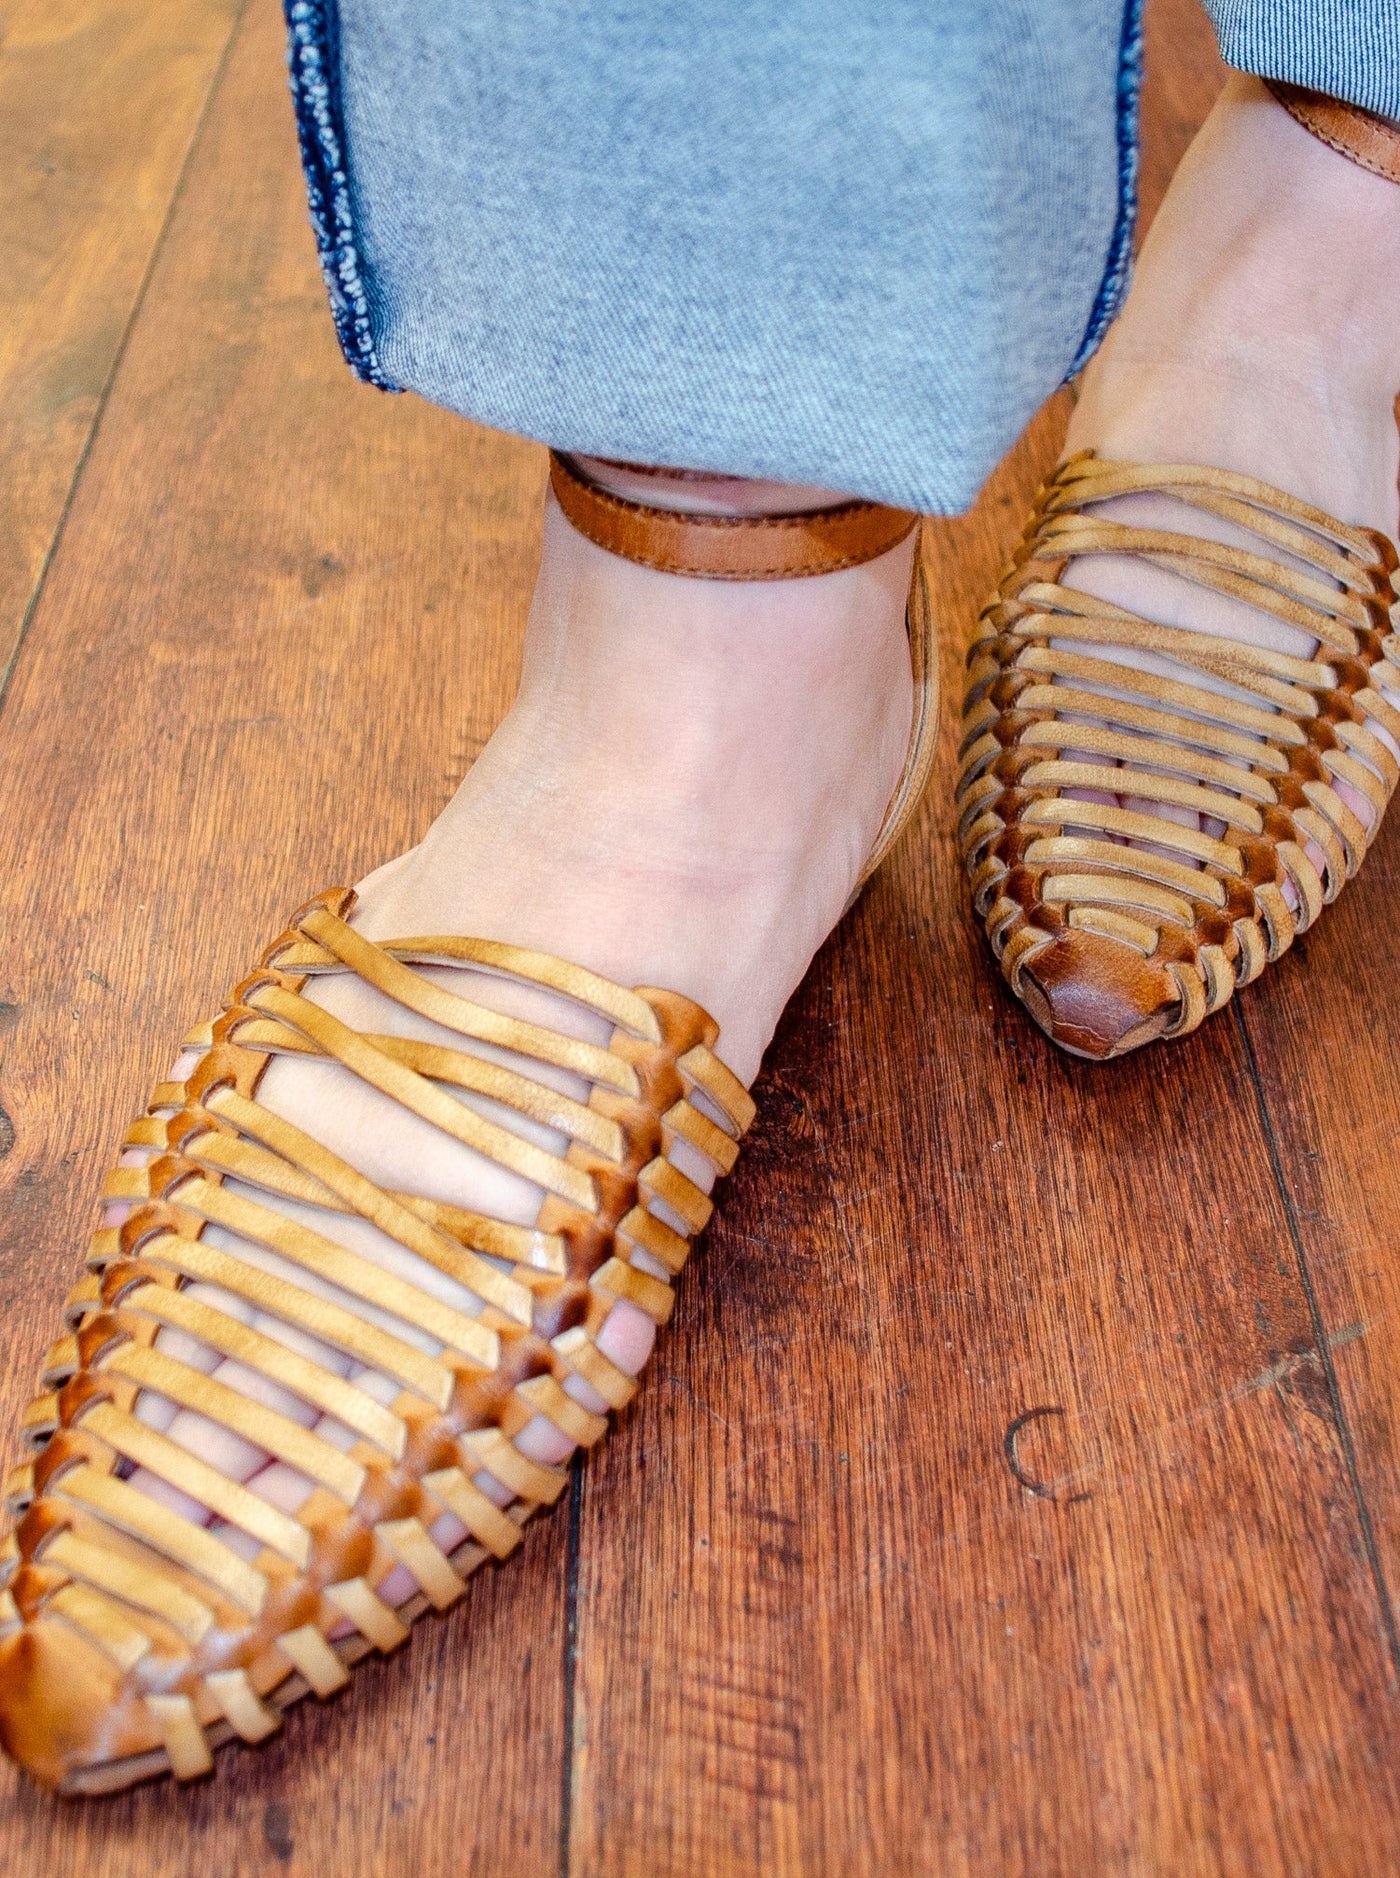 Model is wearing a tan gladiator style pointed sandal. Sandal is worn with jeans.